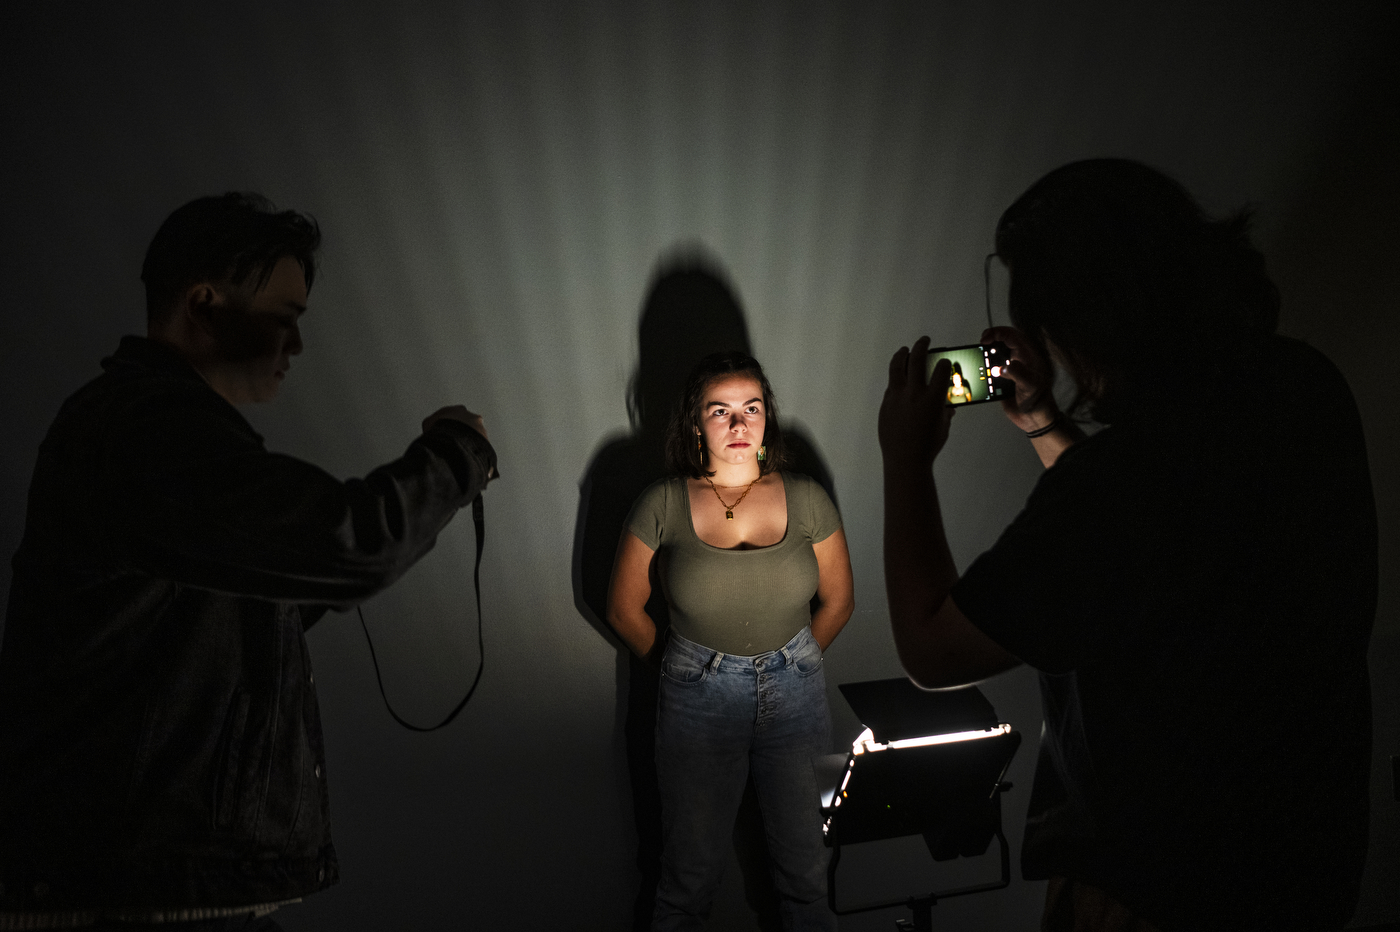 Krista Brochu posing as her classmates test out different lighting.